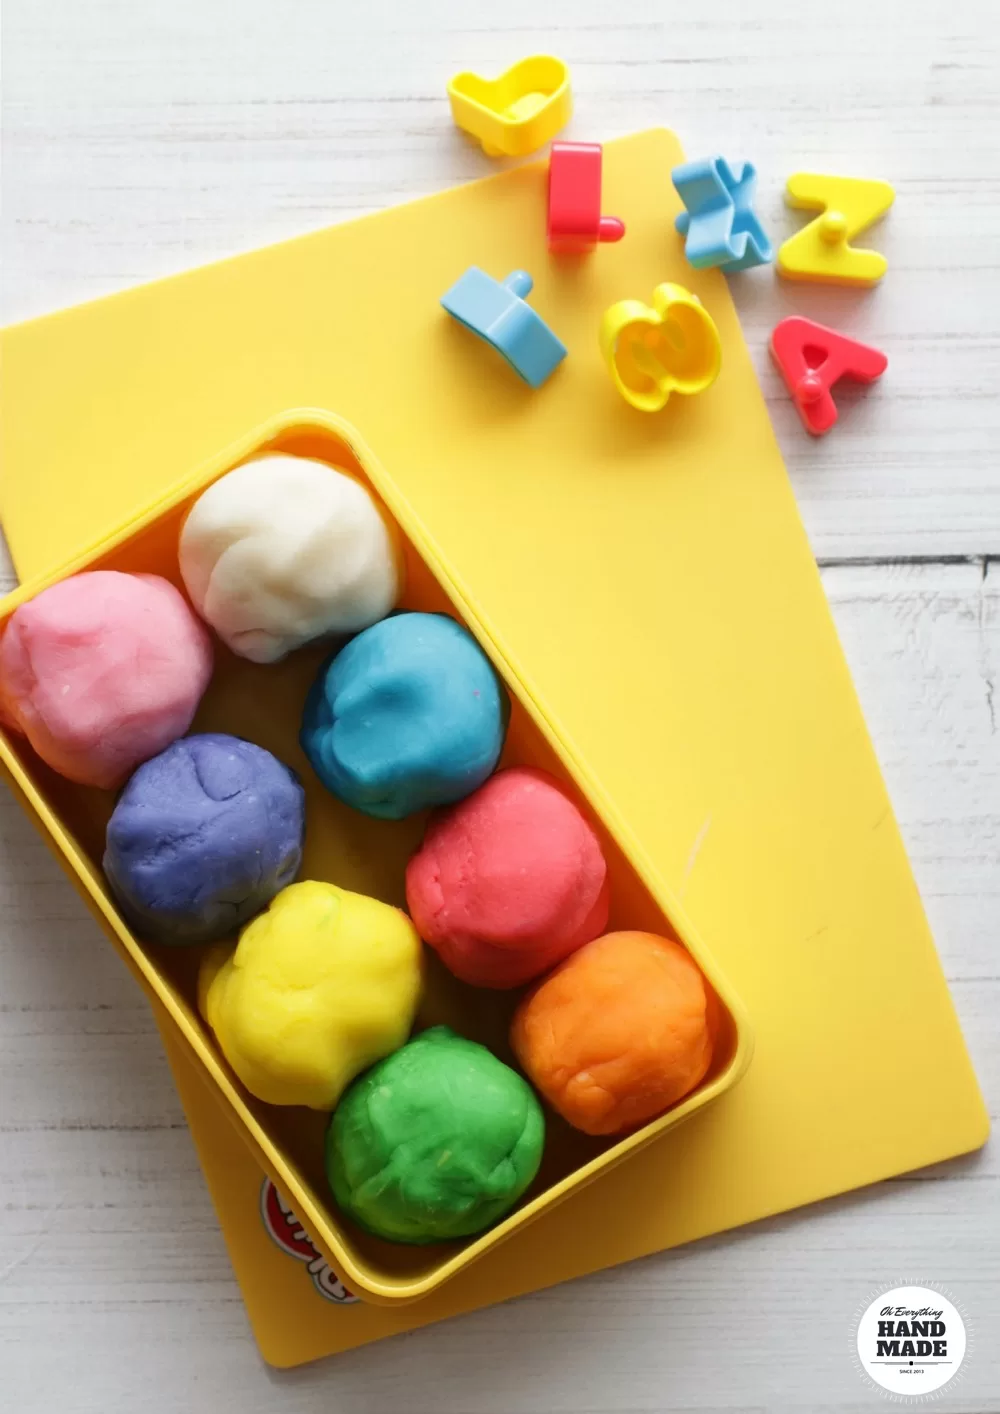 DIY Essential Oil Infused Play-Dough